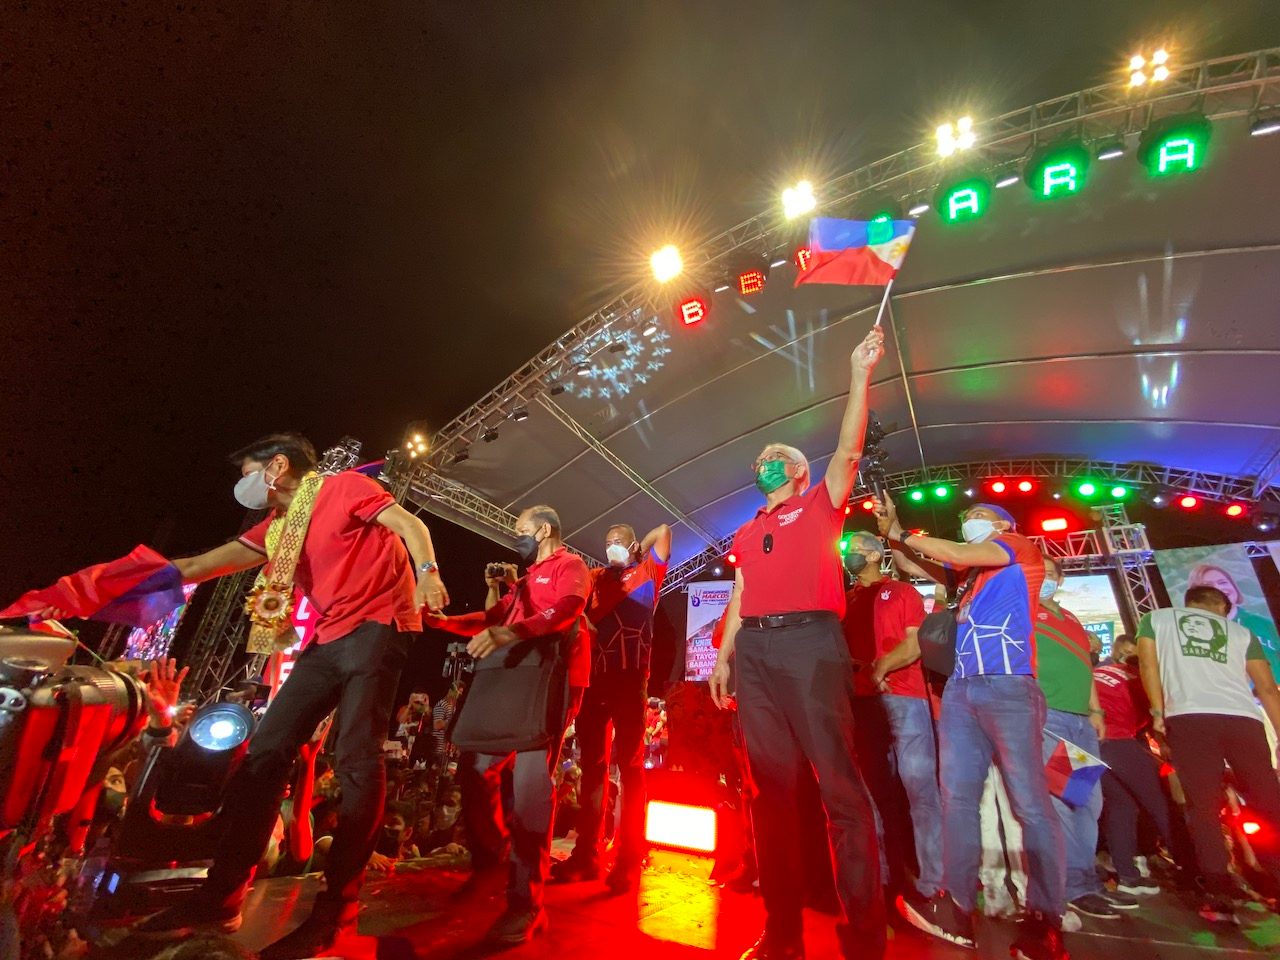 CAMPAIGN TRAIL: After dropping survey points in Luzon, Marcos stops by Mimaropa and Calabarzon